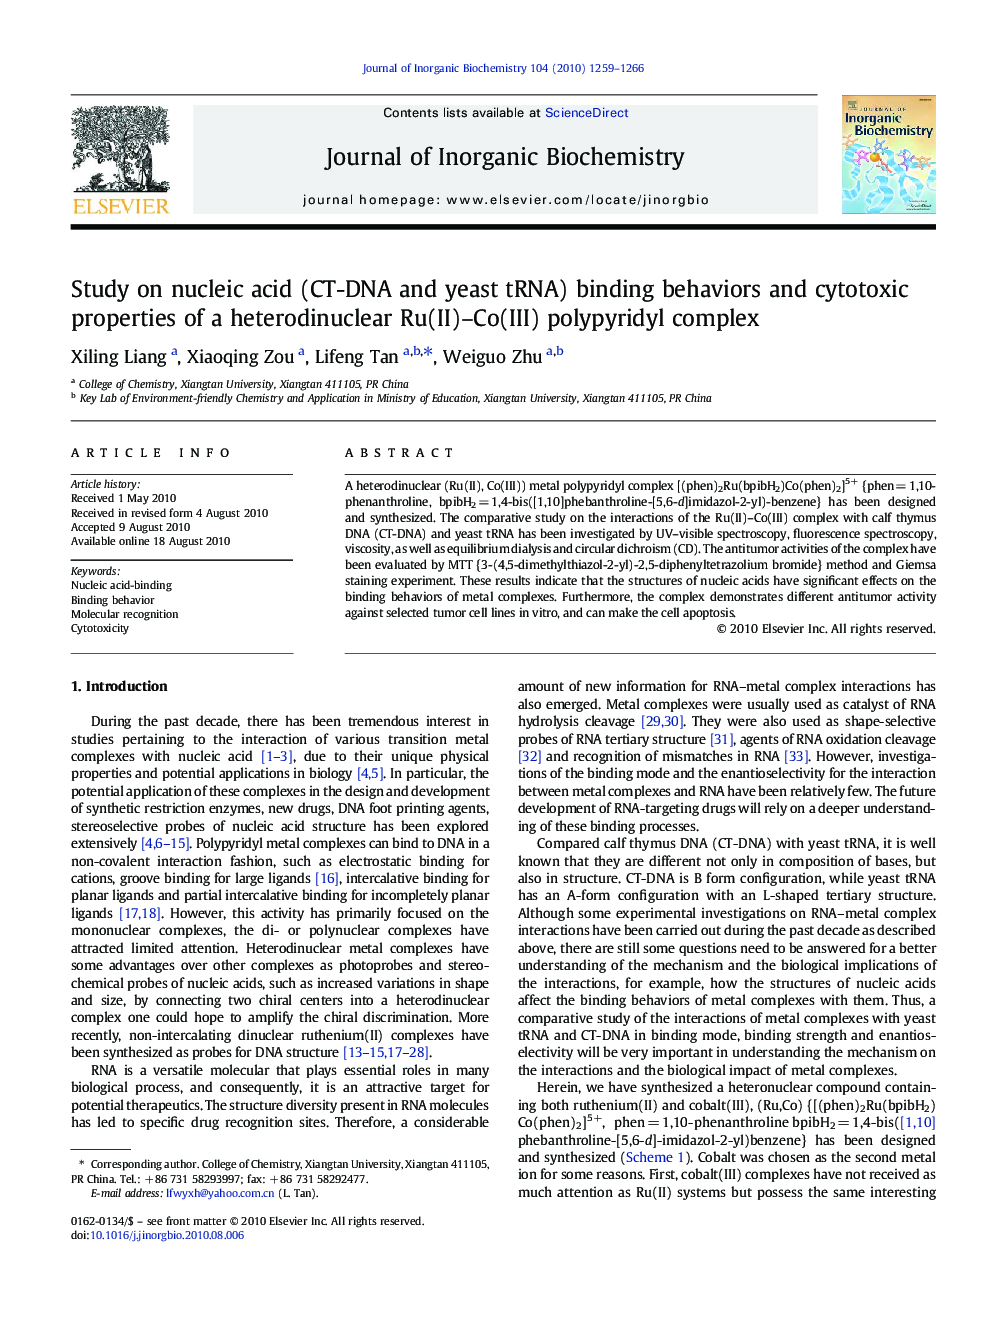 Study on nucleic acid (CT-DNA and yeast tRNA) binding behaviors and cytotoxic properties of a heterodinuclear Ru(II)–Co(III) polypyridyl complex